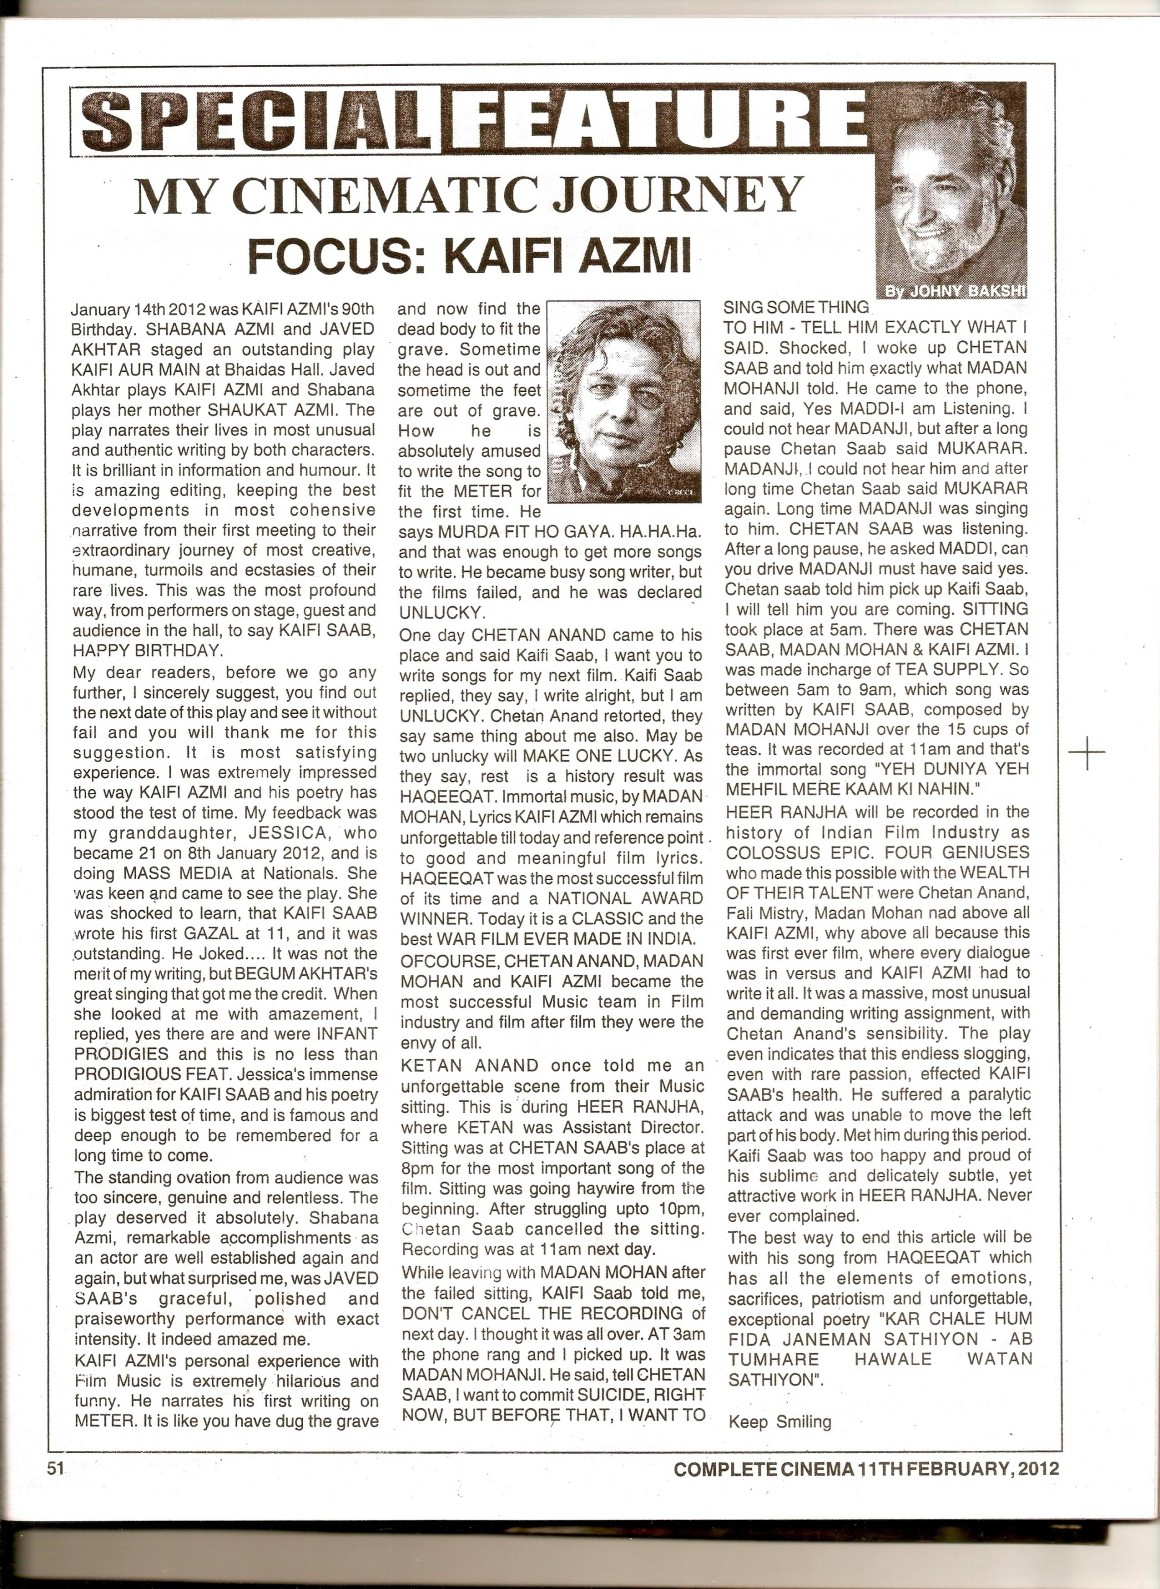 Article by Jhony Bakshi